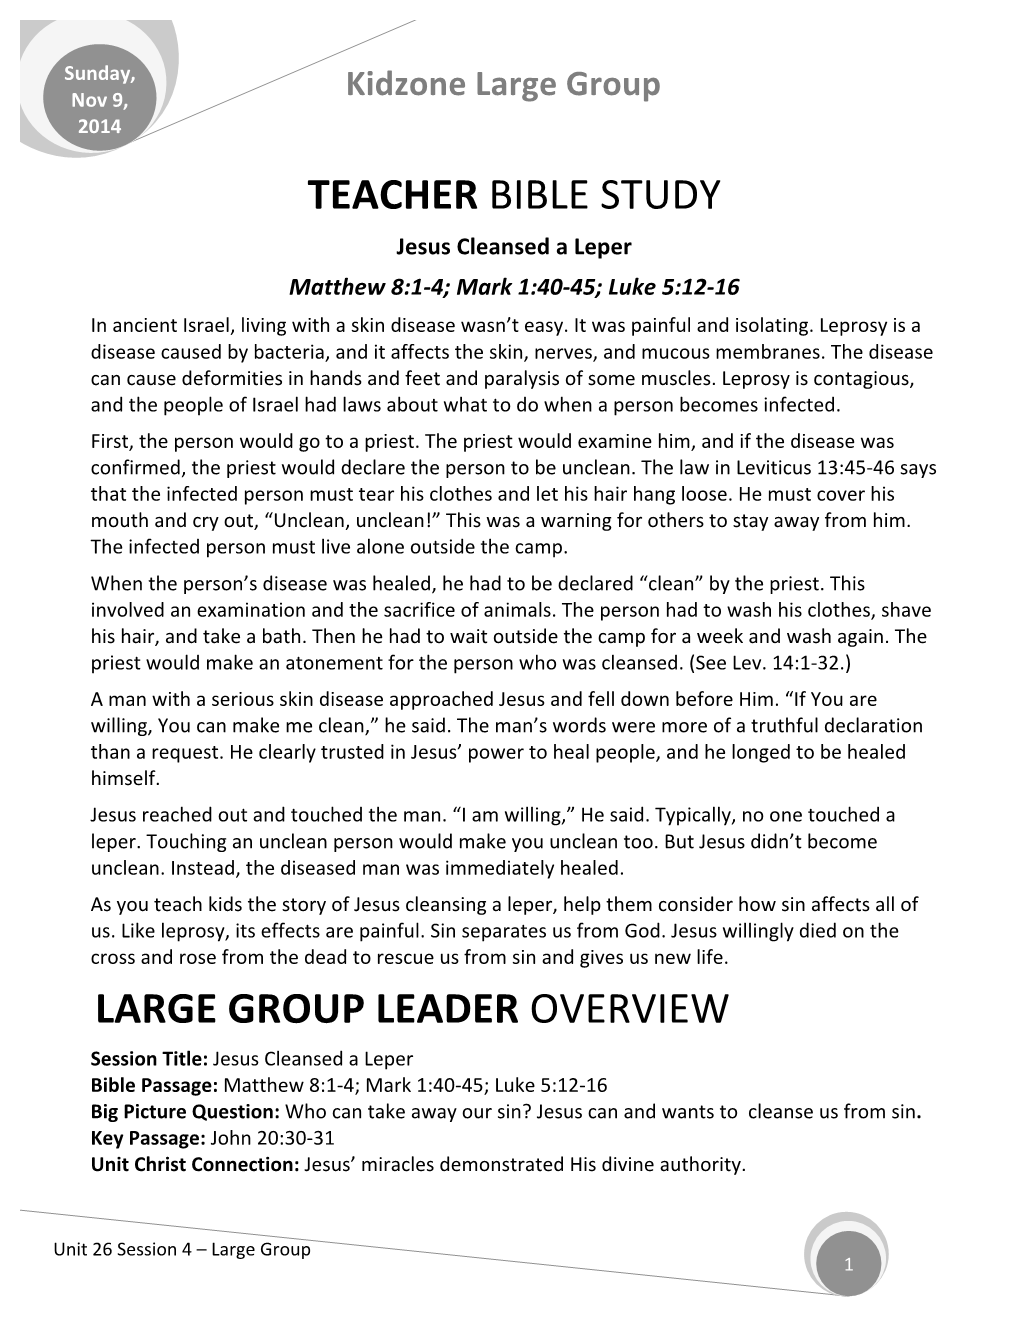 Teacher Bible Study Large Group Leader Overview